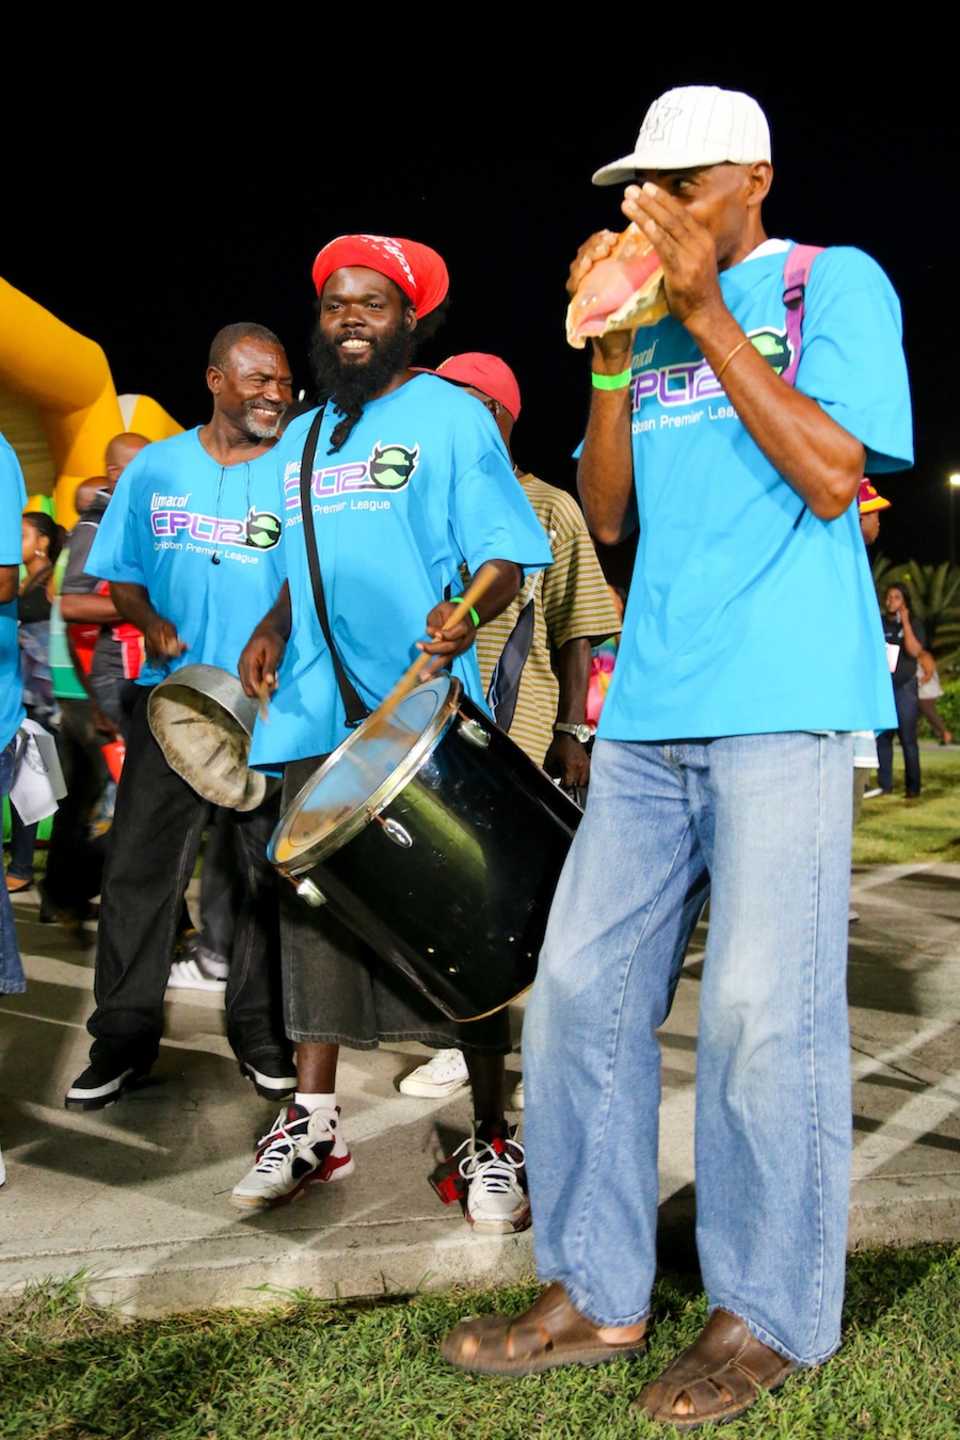 Music and cricket go hand-in-hand in West Indies